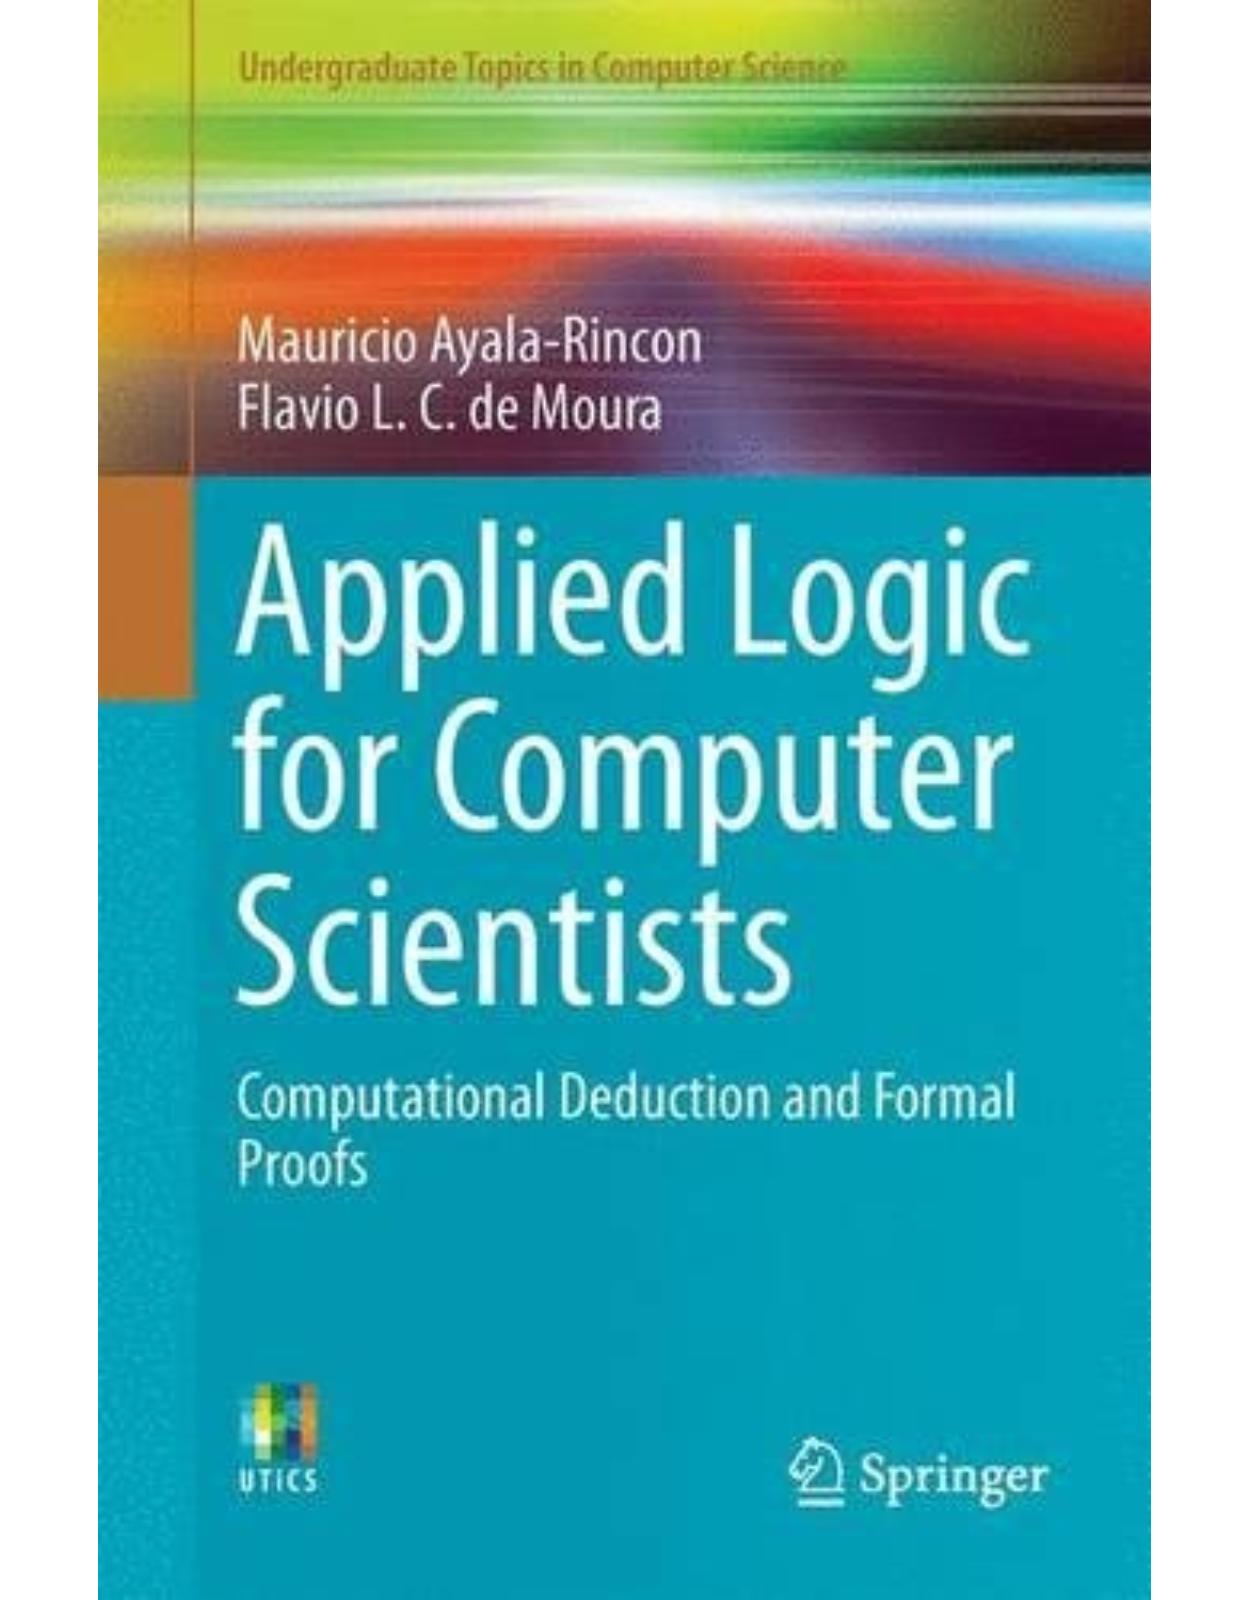 Applied Logic for Computer Scientists: Computational Deduction and Formal Proofs